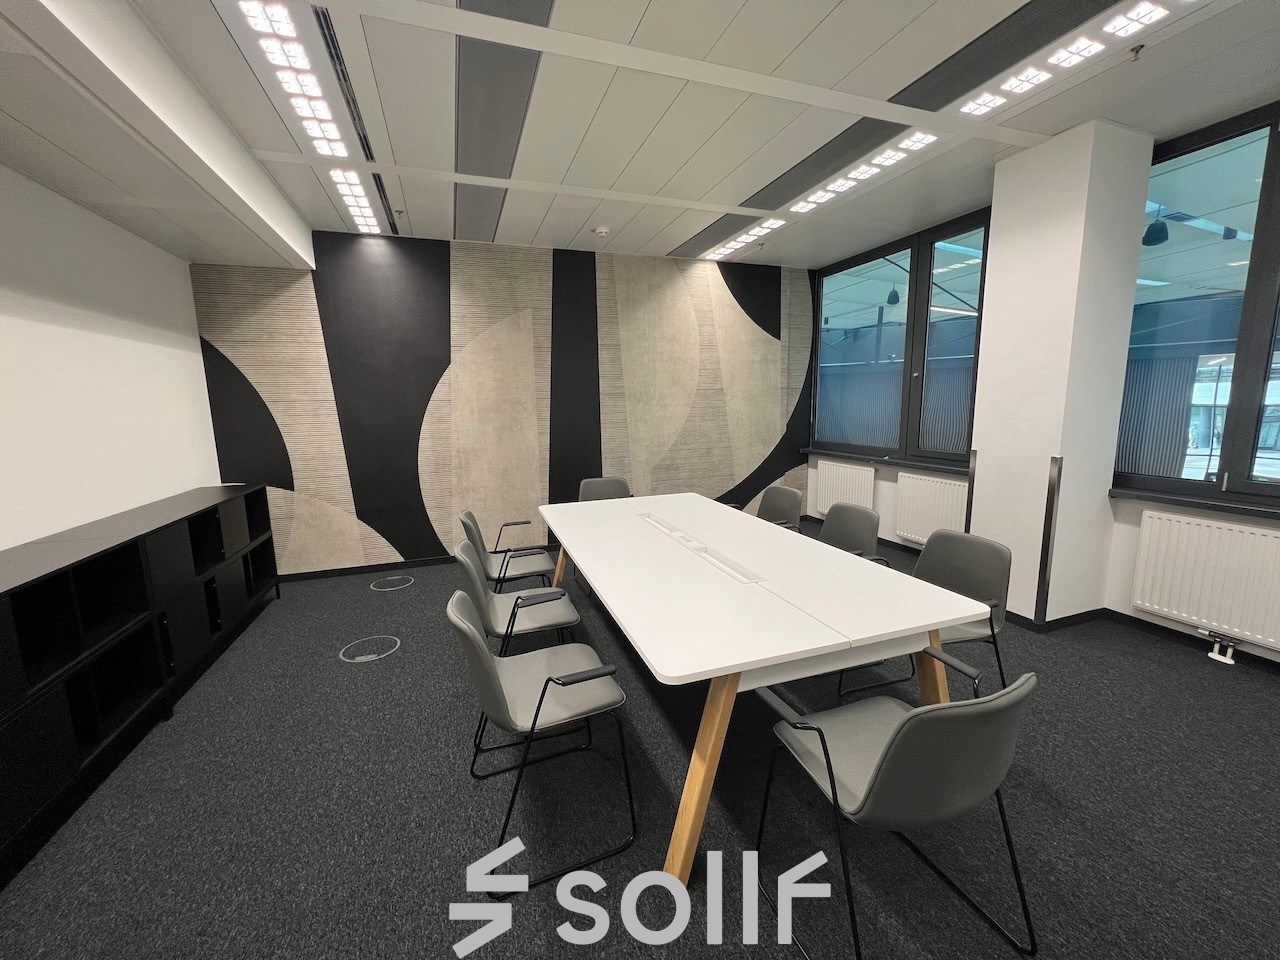 Modern office space rental at Am Euro Platz 2, 1120 Vienna Meidling, with a sleek white table, comfortable chairs, and stylish geometric wall design.